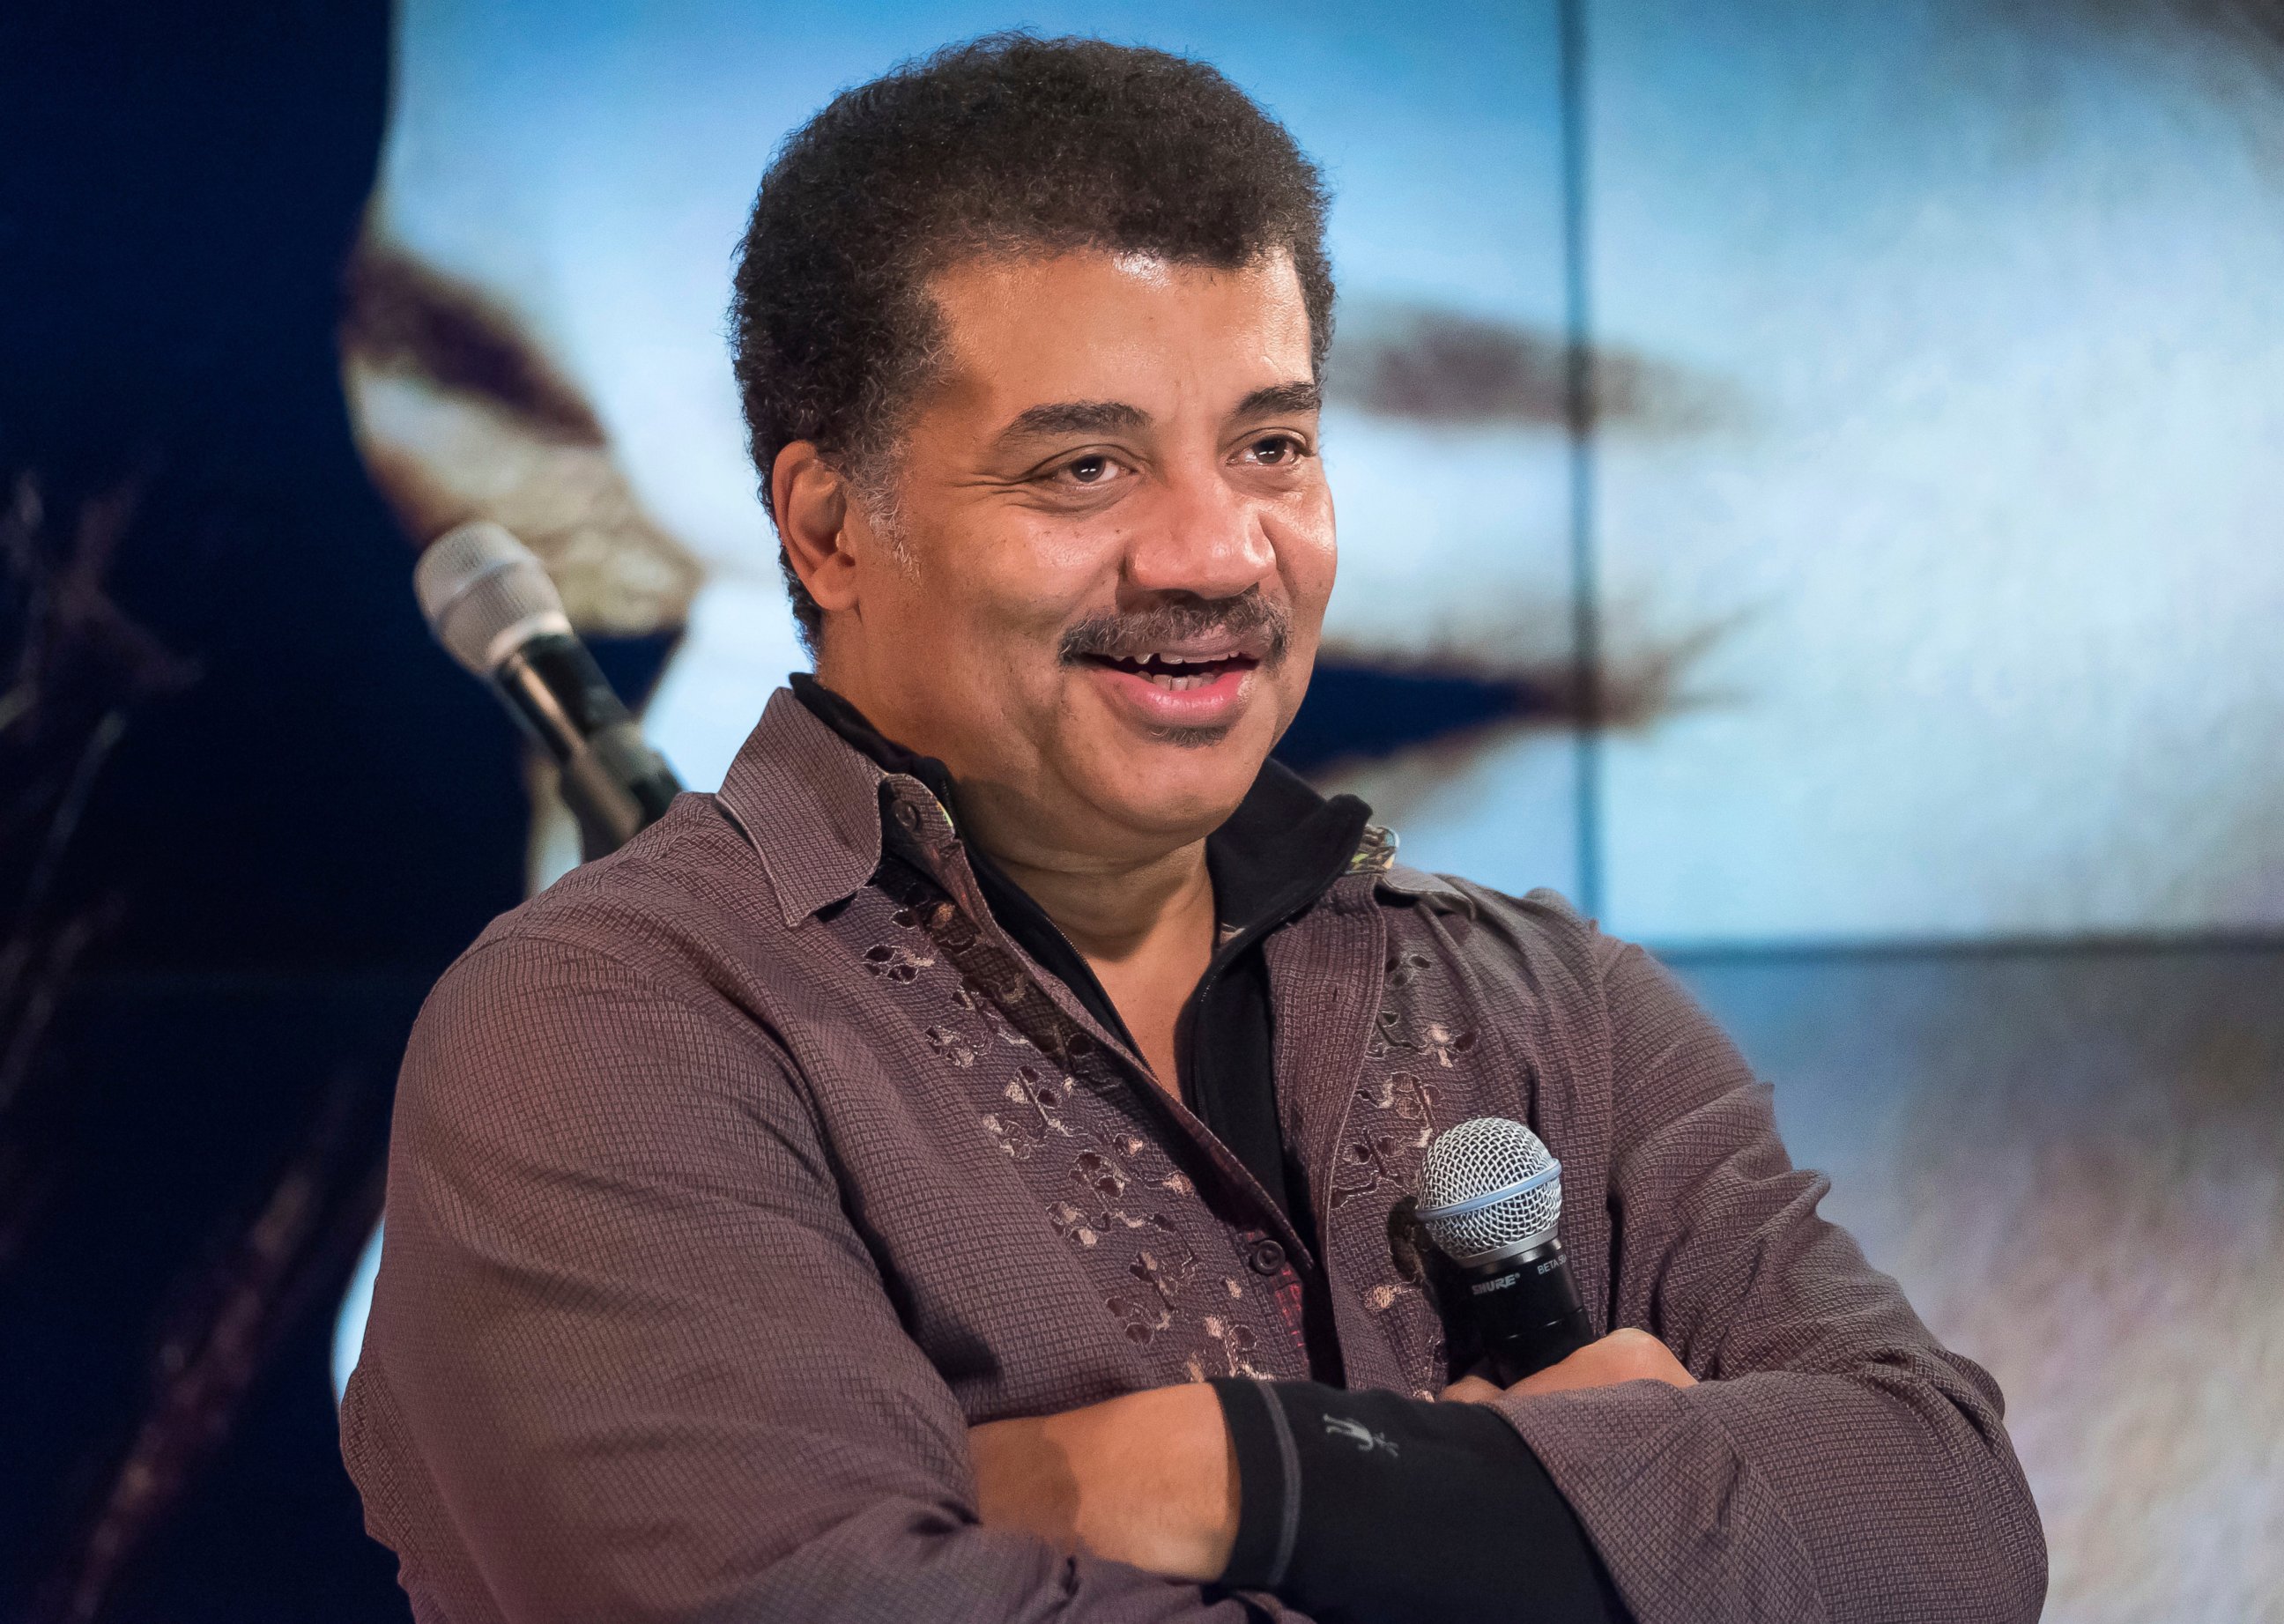 PHOTO: Neil deGrasse Tyson defended himself against sexual misconduct allegations in a statement on Saturday, Dec. 1, 2018.